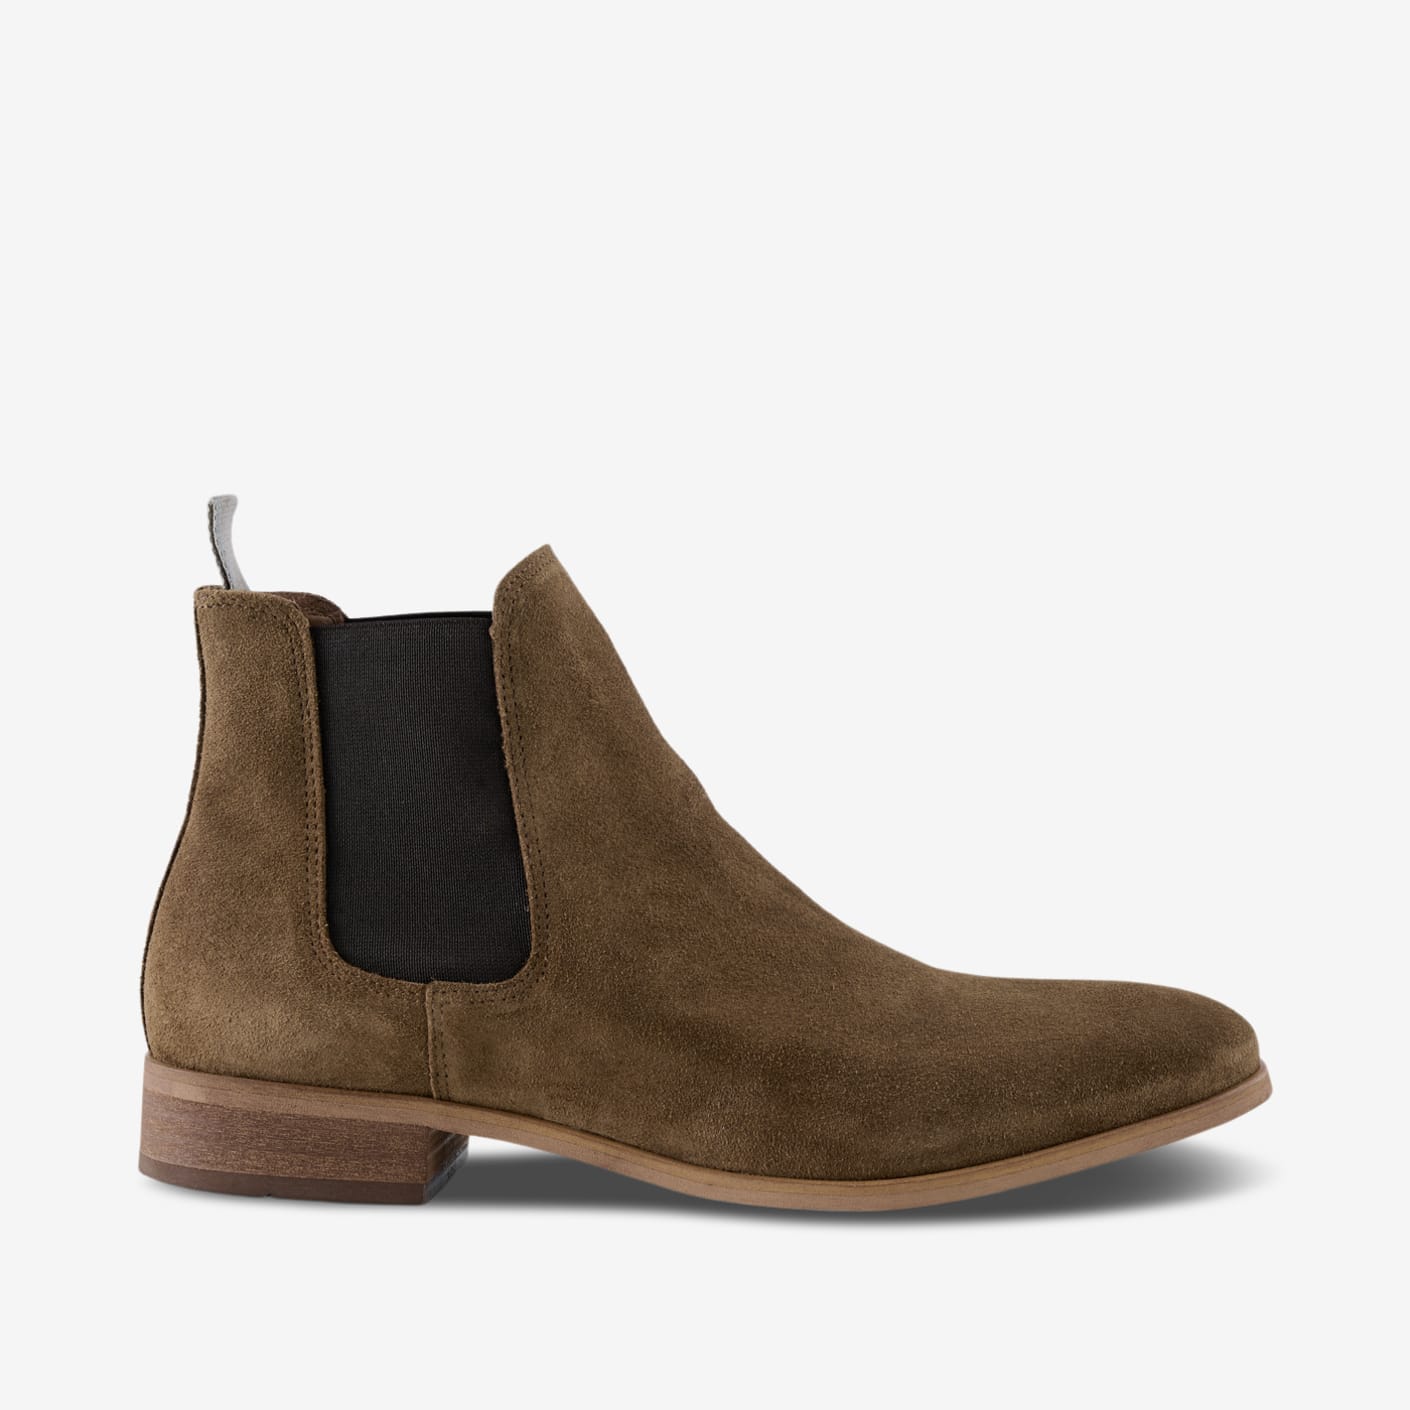 Shoe The Bear, Dev Suede Boot, Tobacco